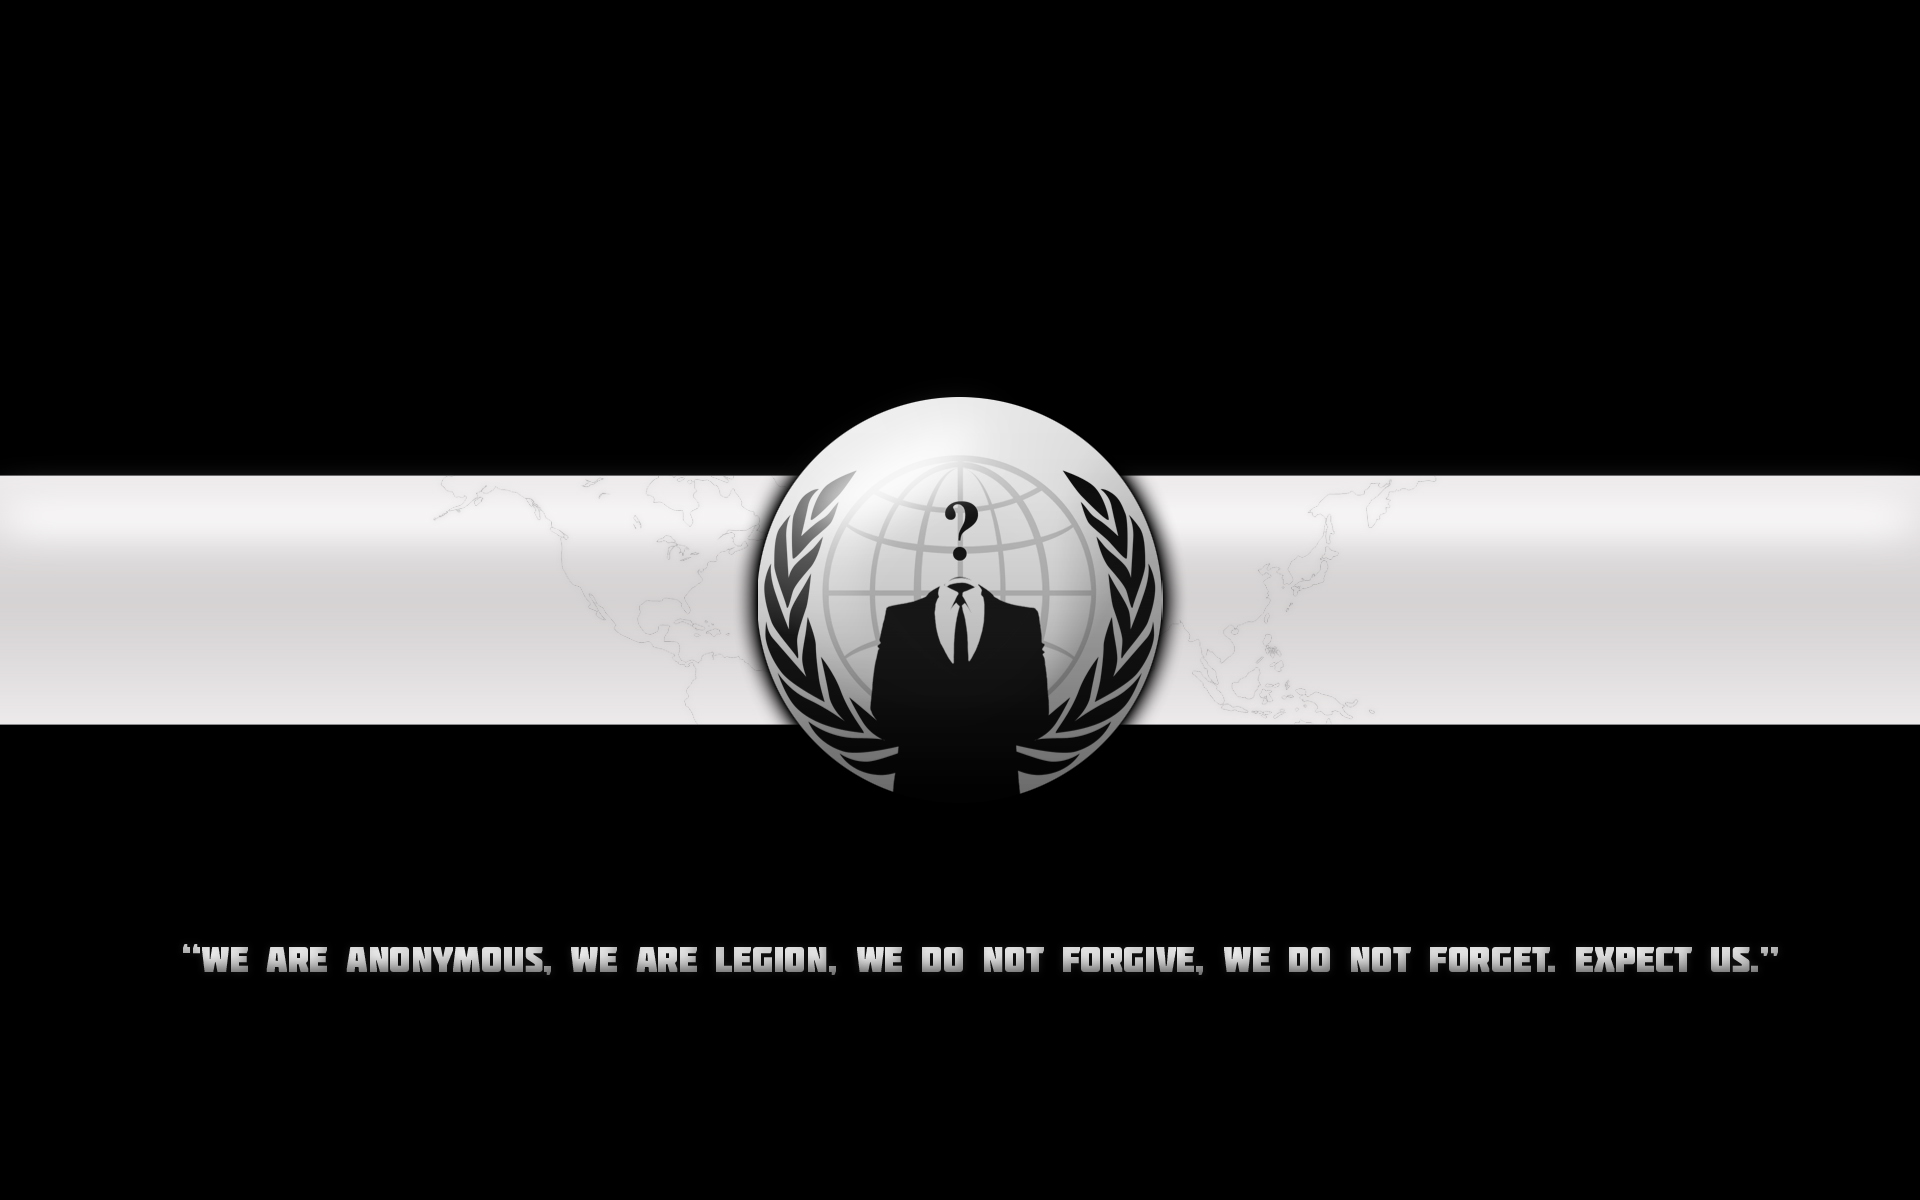 We are Anonymous We are legion wallpaper   574786 1920x1200